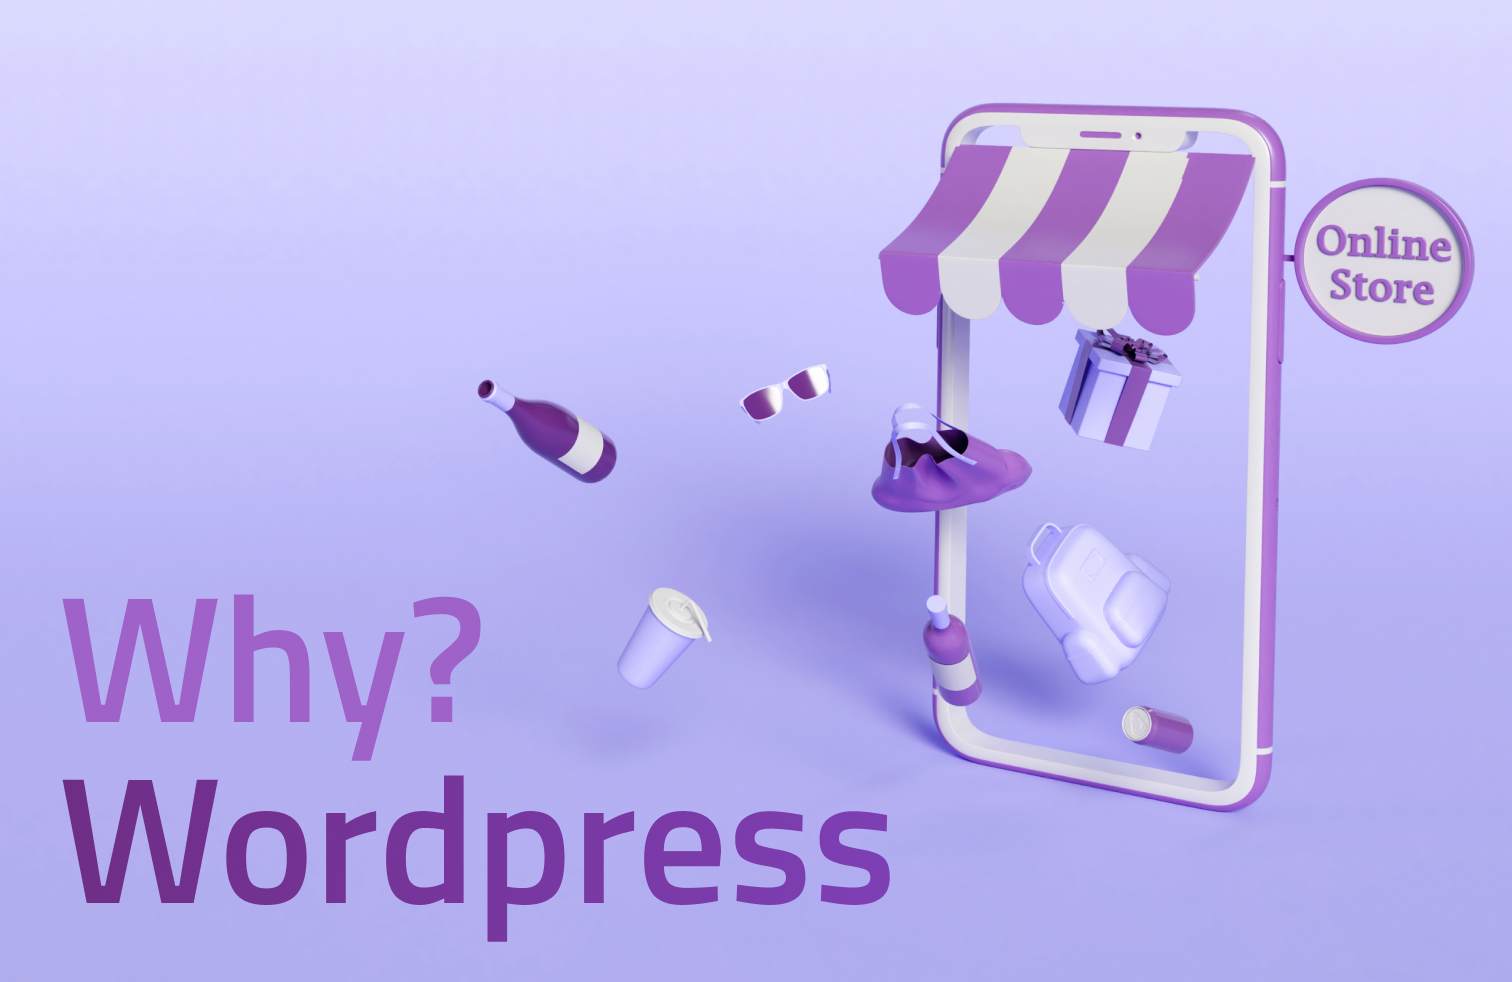 WordPress is the Perfect Option for Your Online Business